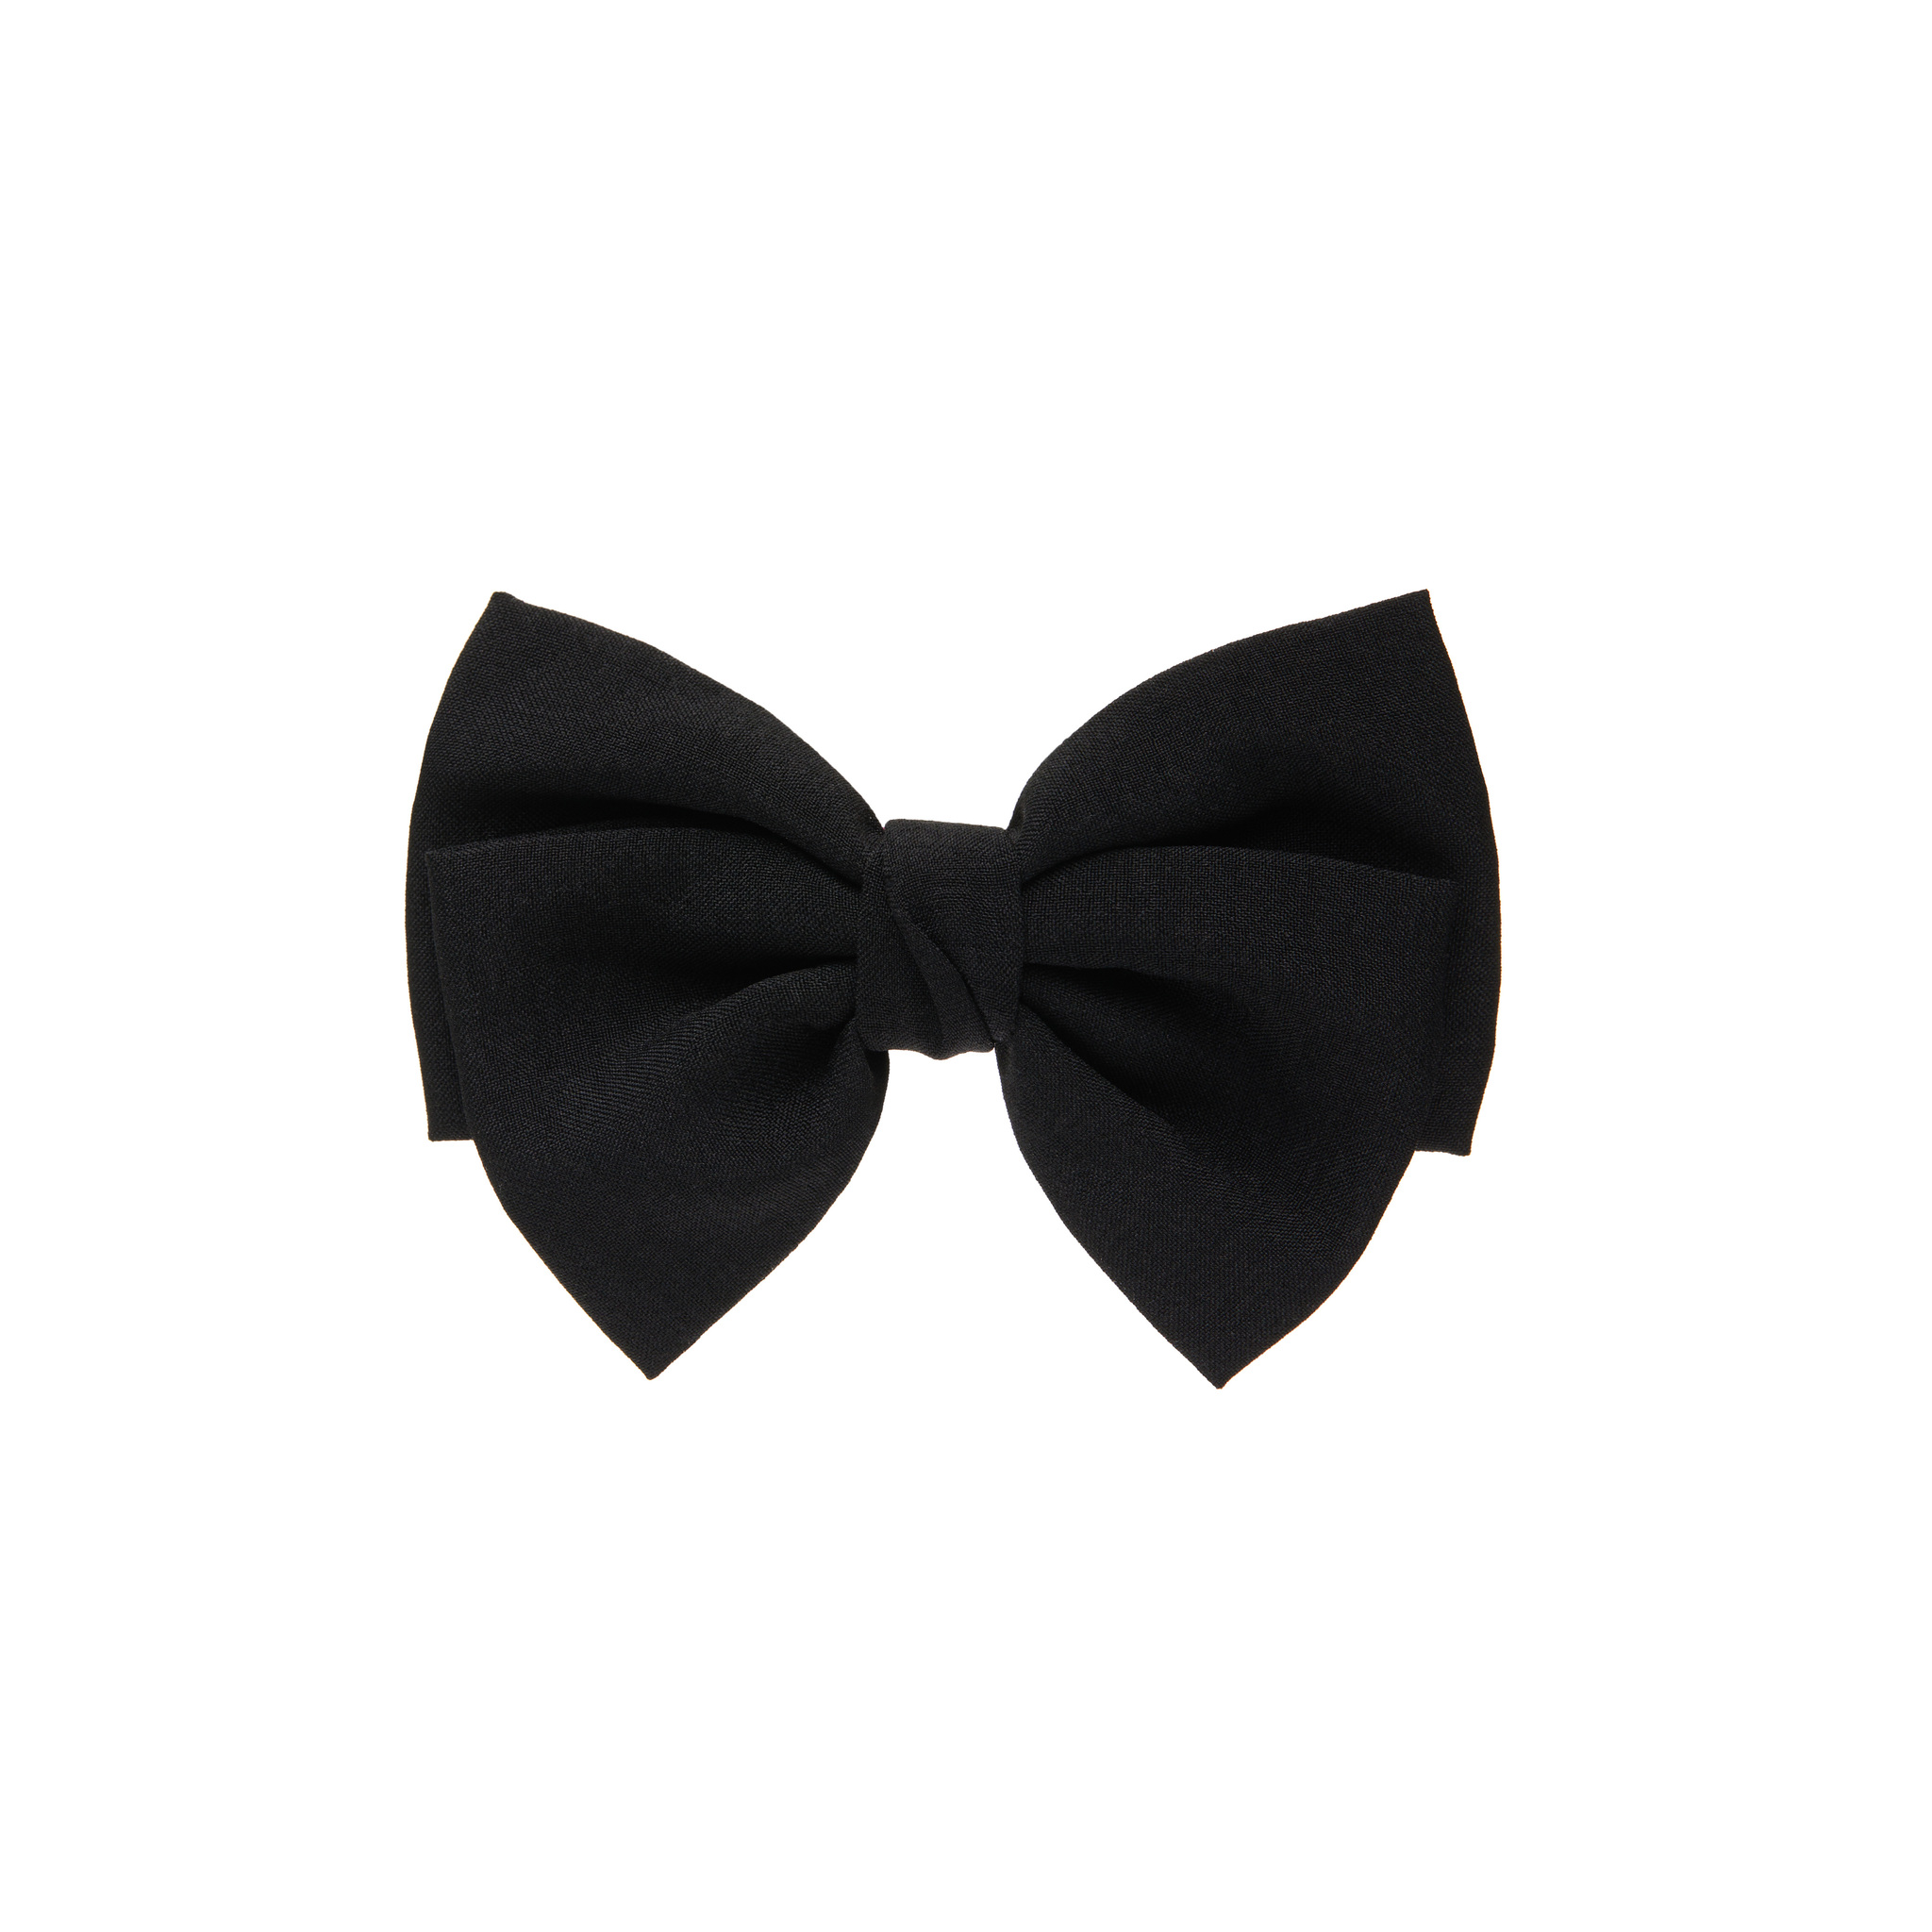 HOLLY JUNE Заколка Bow Hair Clip – Black holly june серьга pearly bow earring